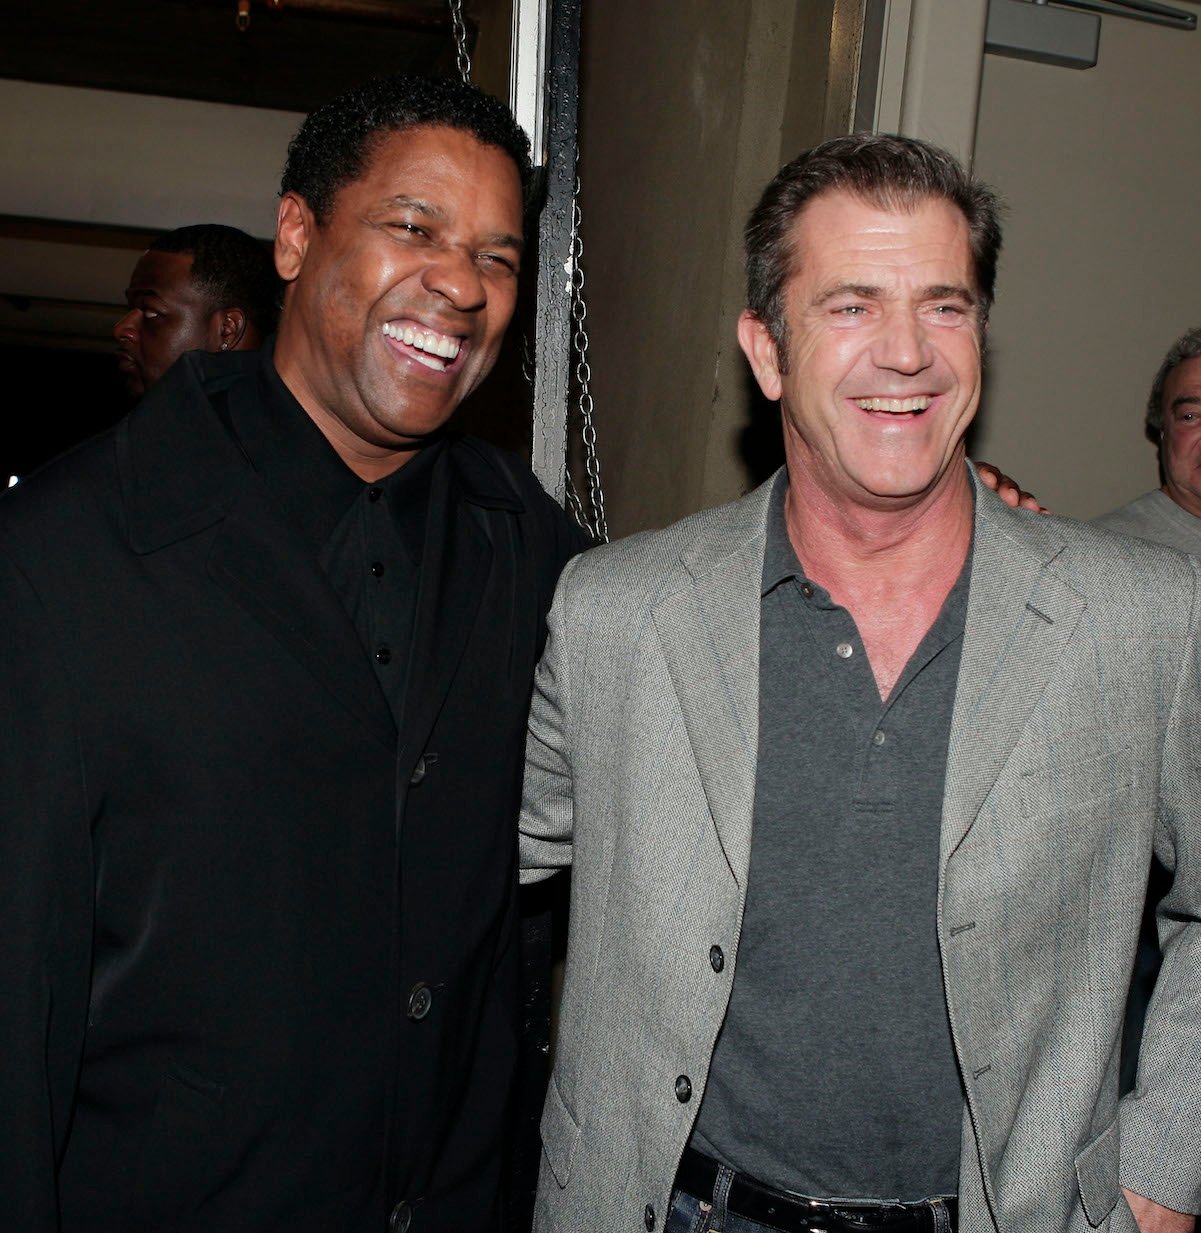 Mel Gibson Once Revealed He Was 'Never' Allowed 'In the Same Room' as Denzel Washington or Richard Gere